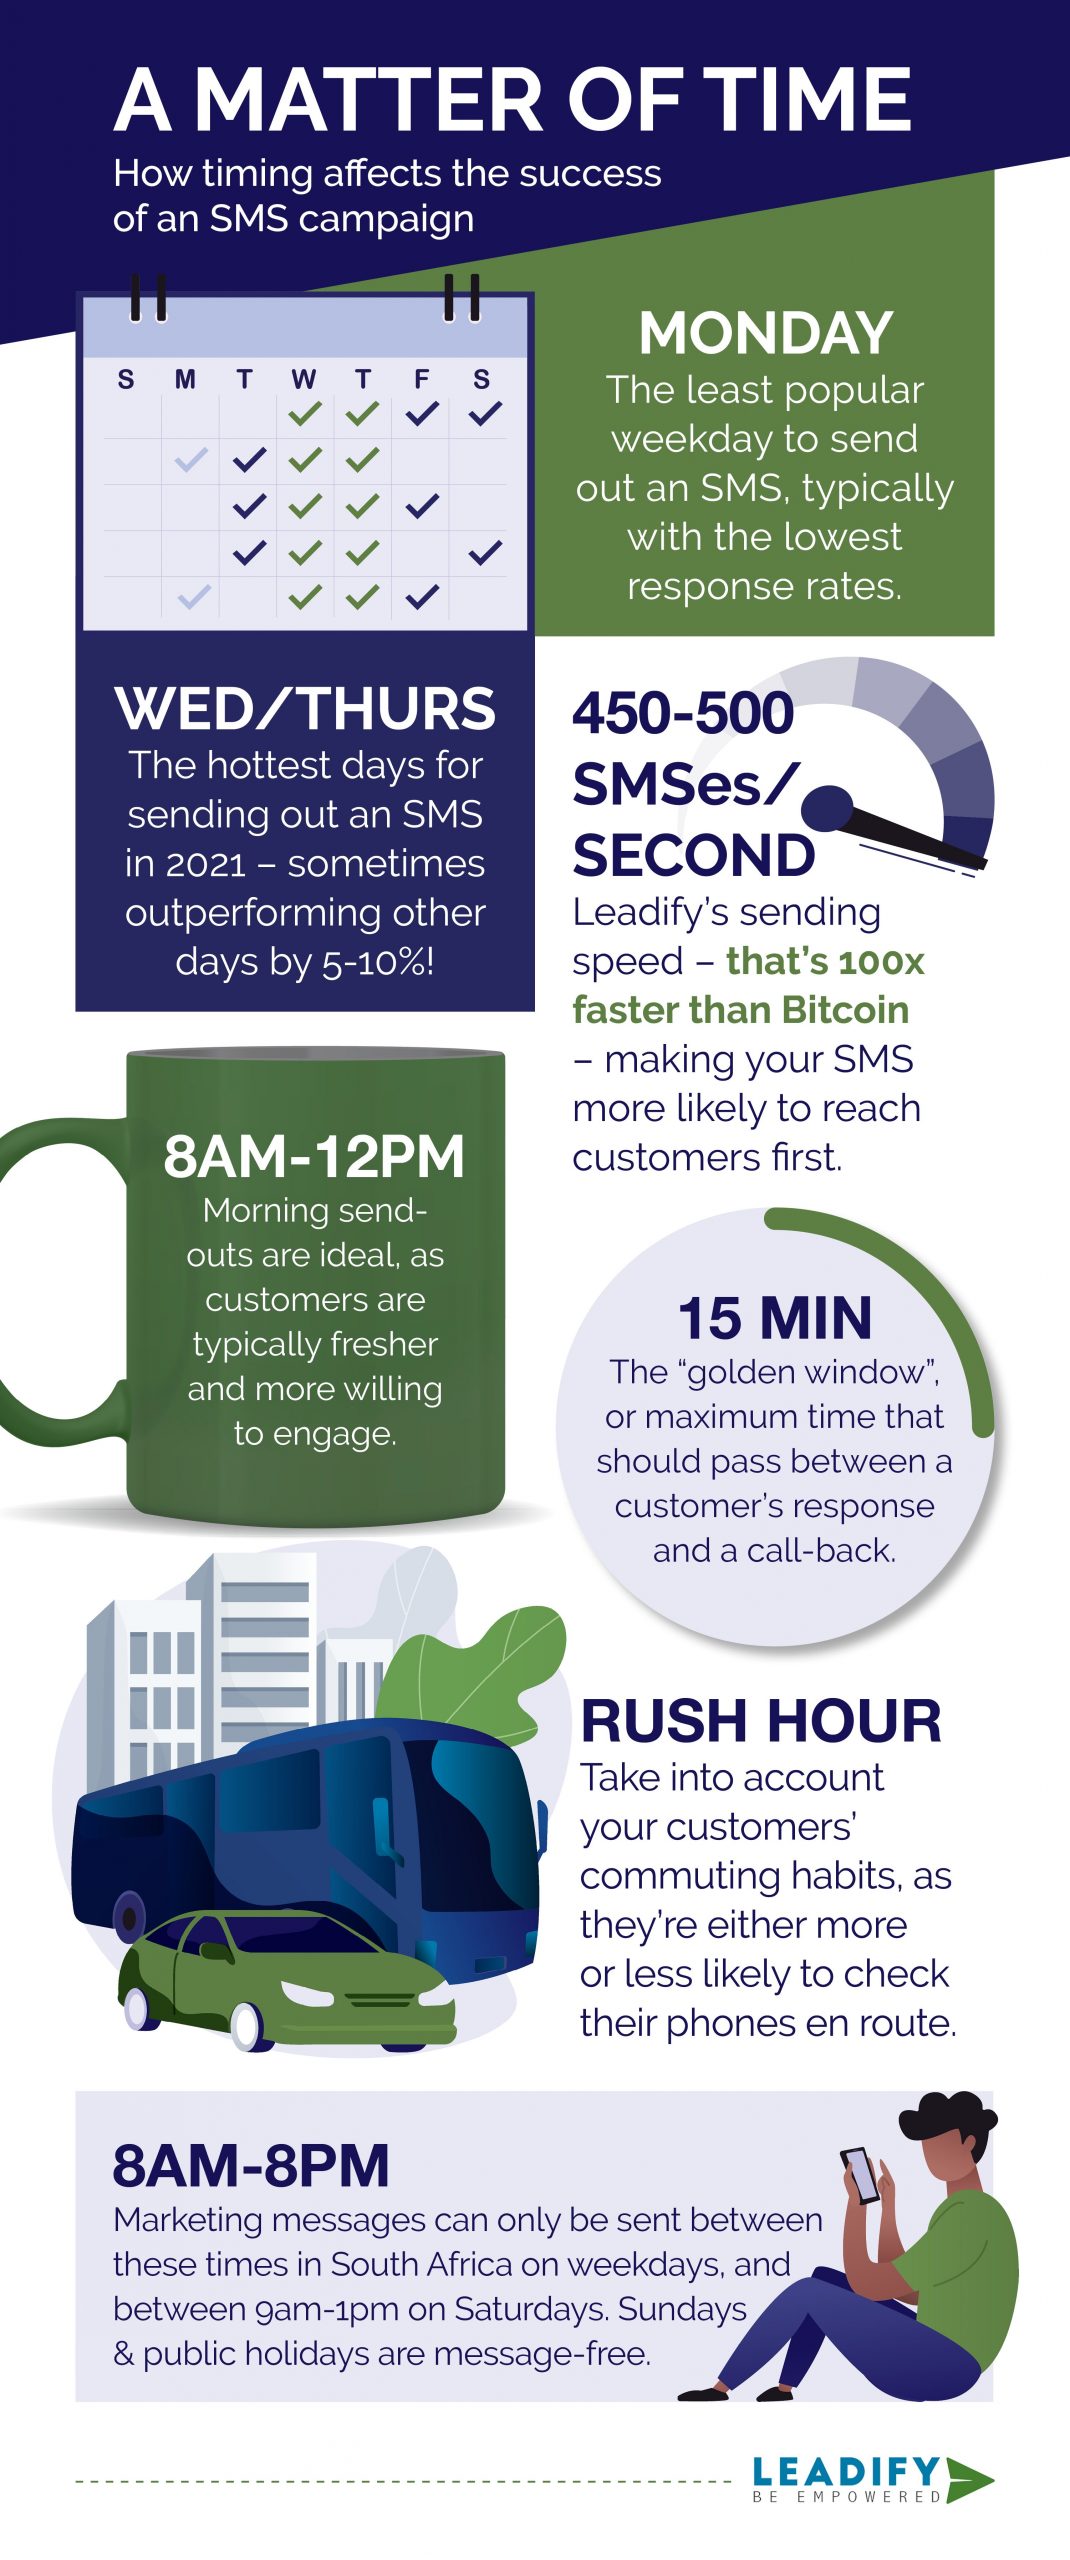 How timing affects the success of an SMS campaign